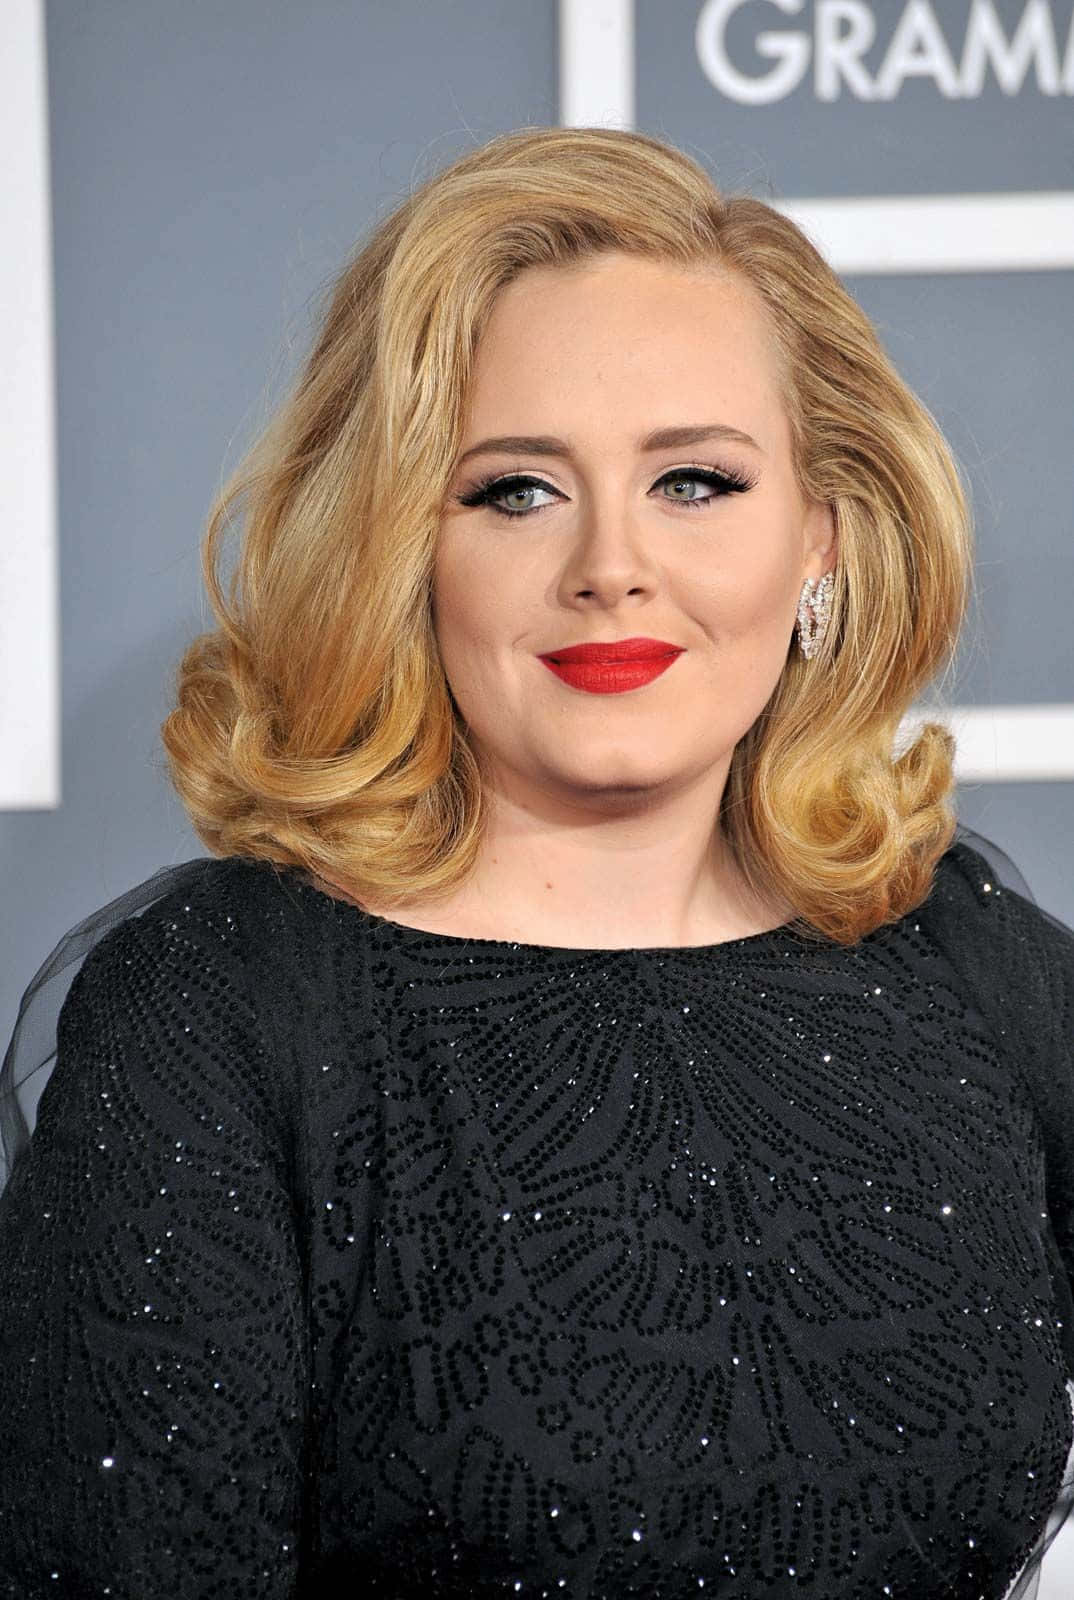 Adele Performing At The Grammy Awards